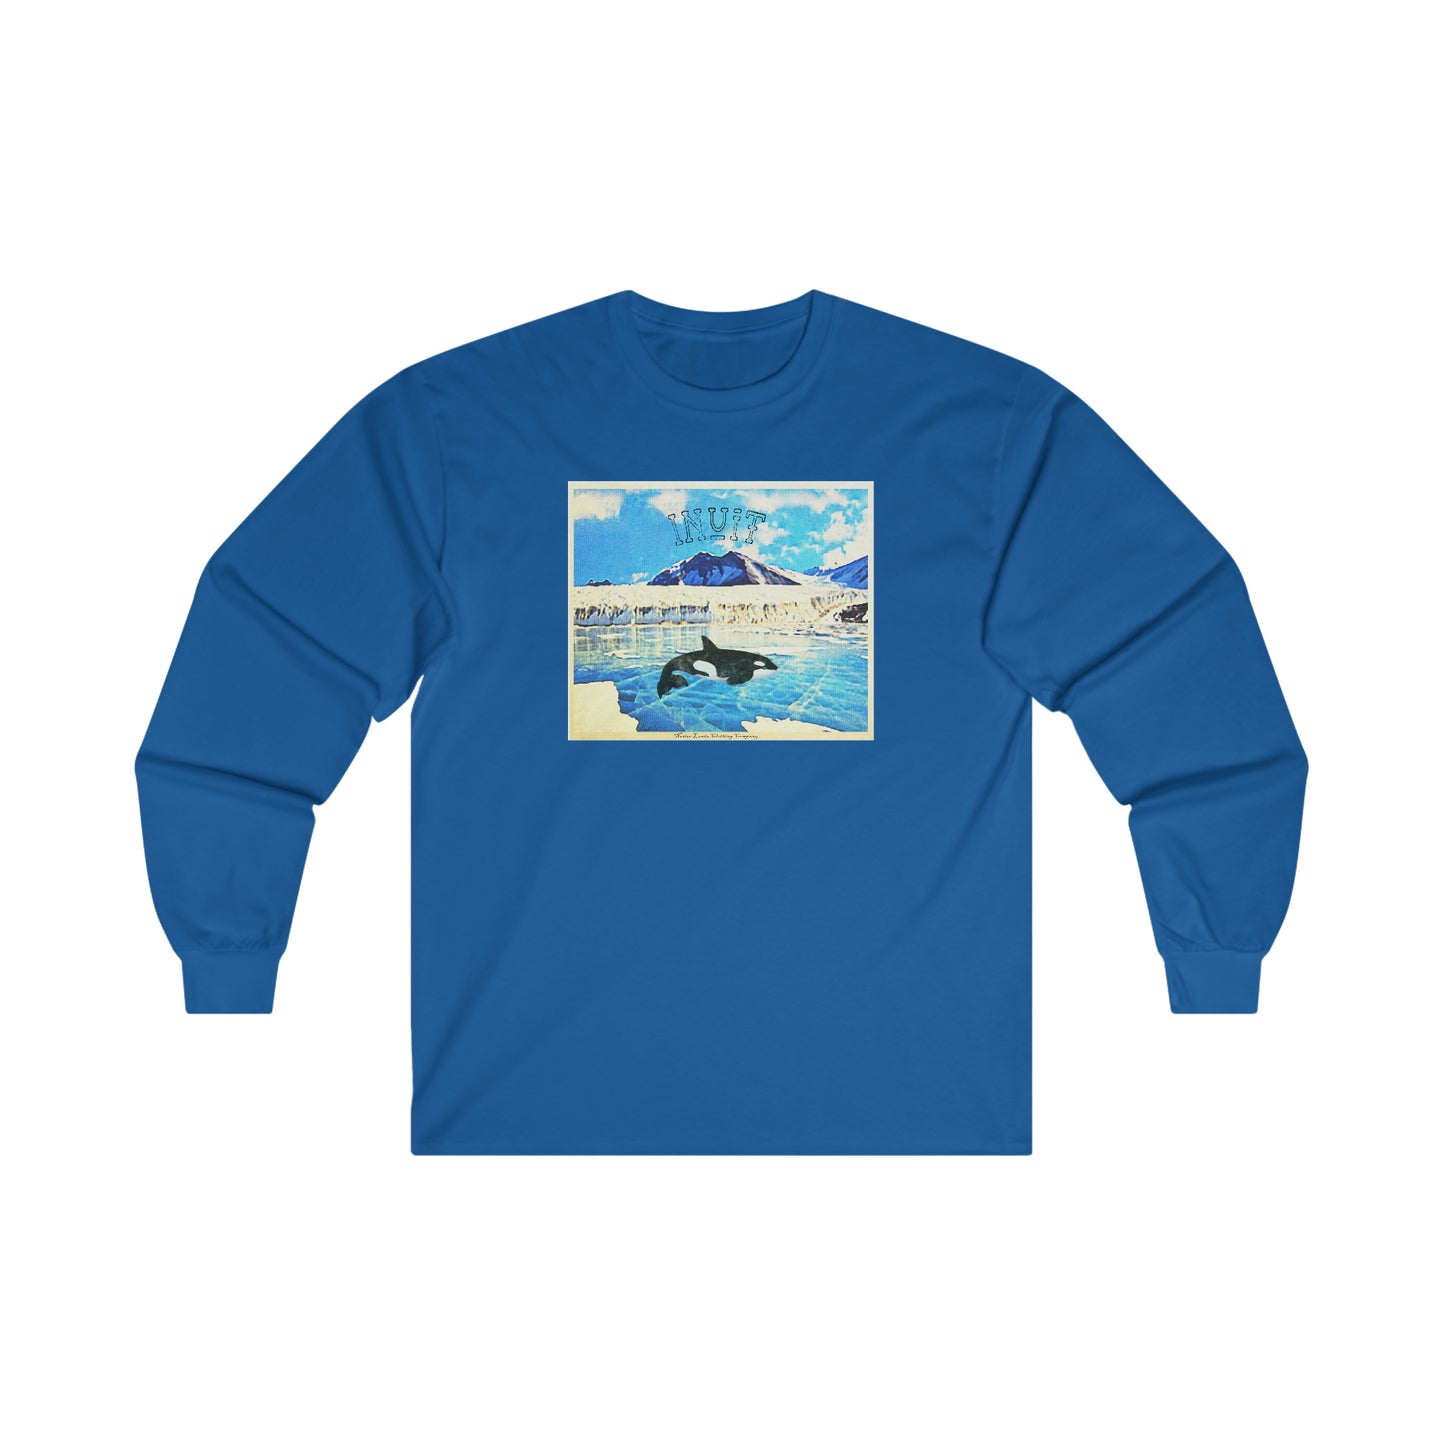 Inuit Tribe Long Sleeve Shirt Orca Cotton Native American